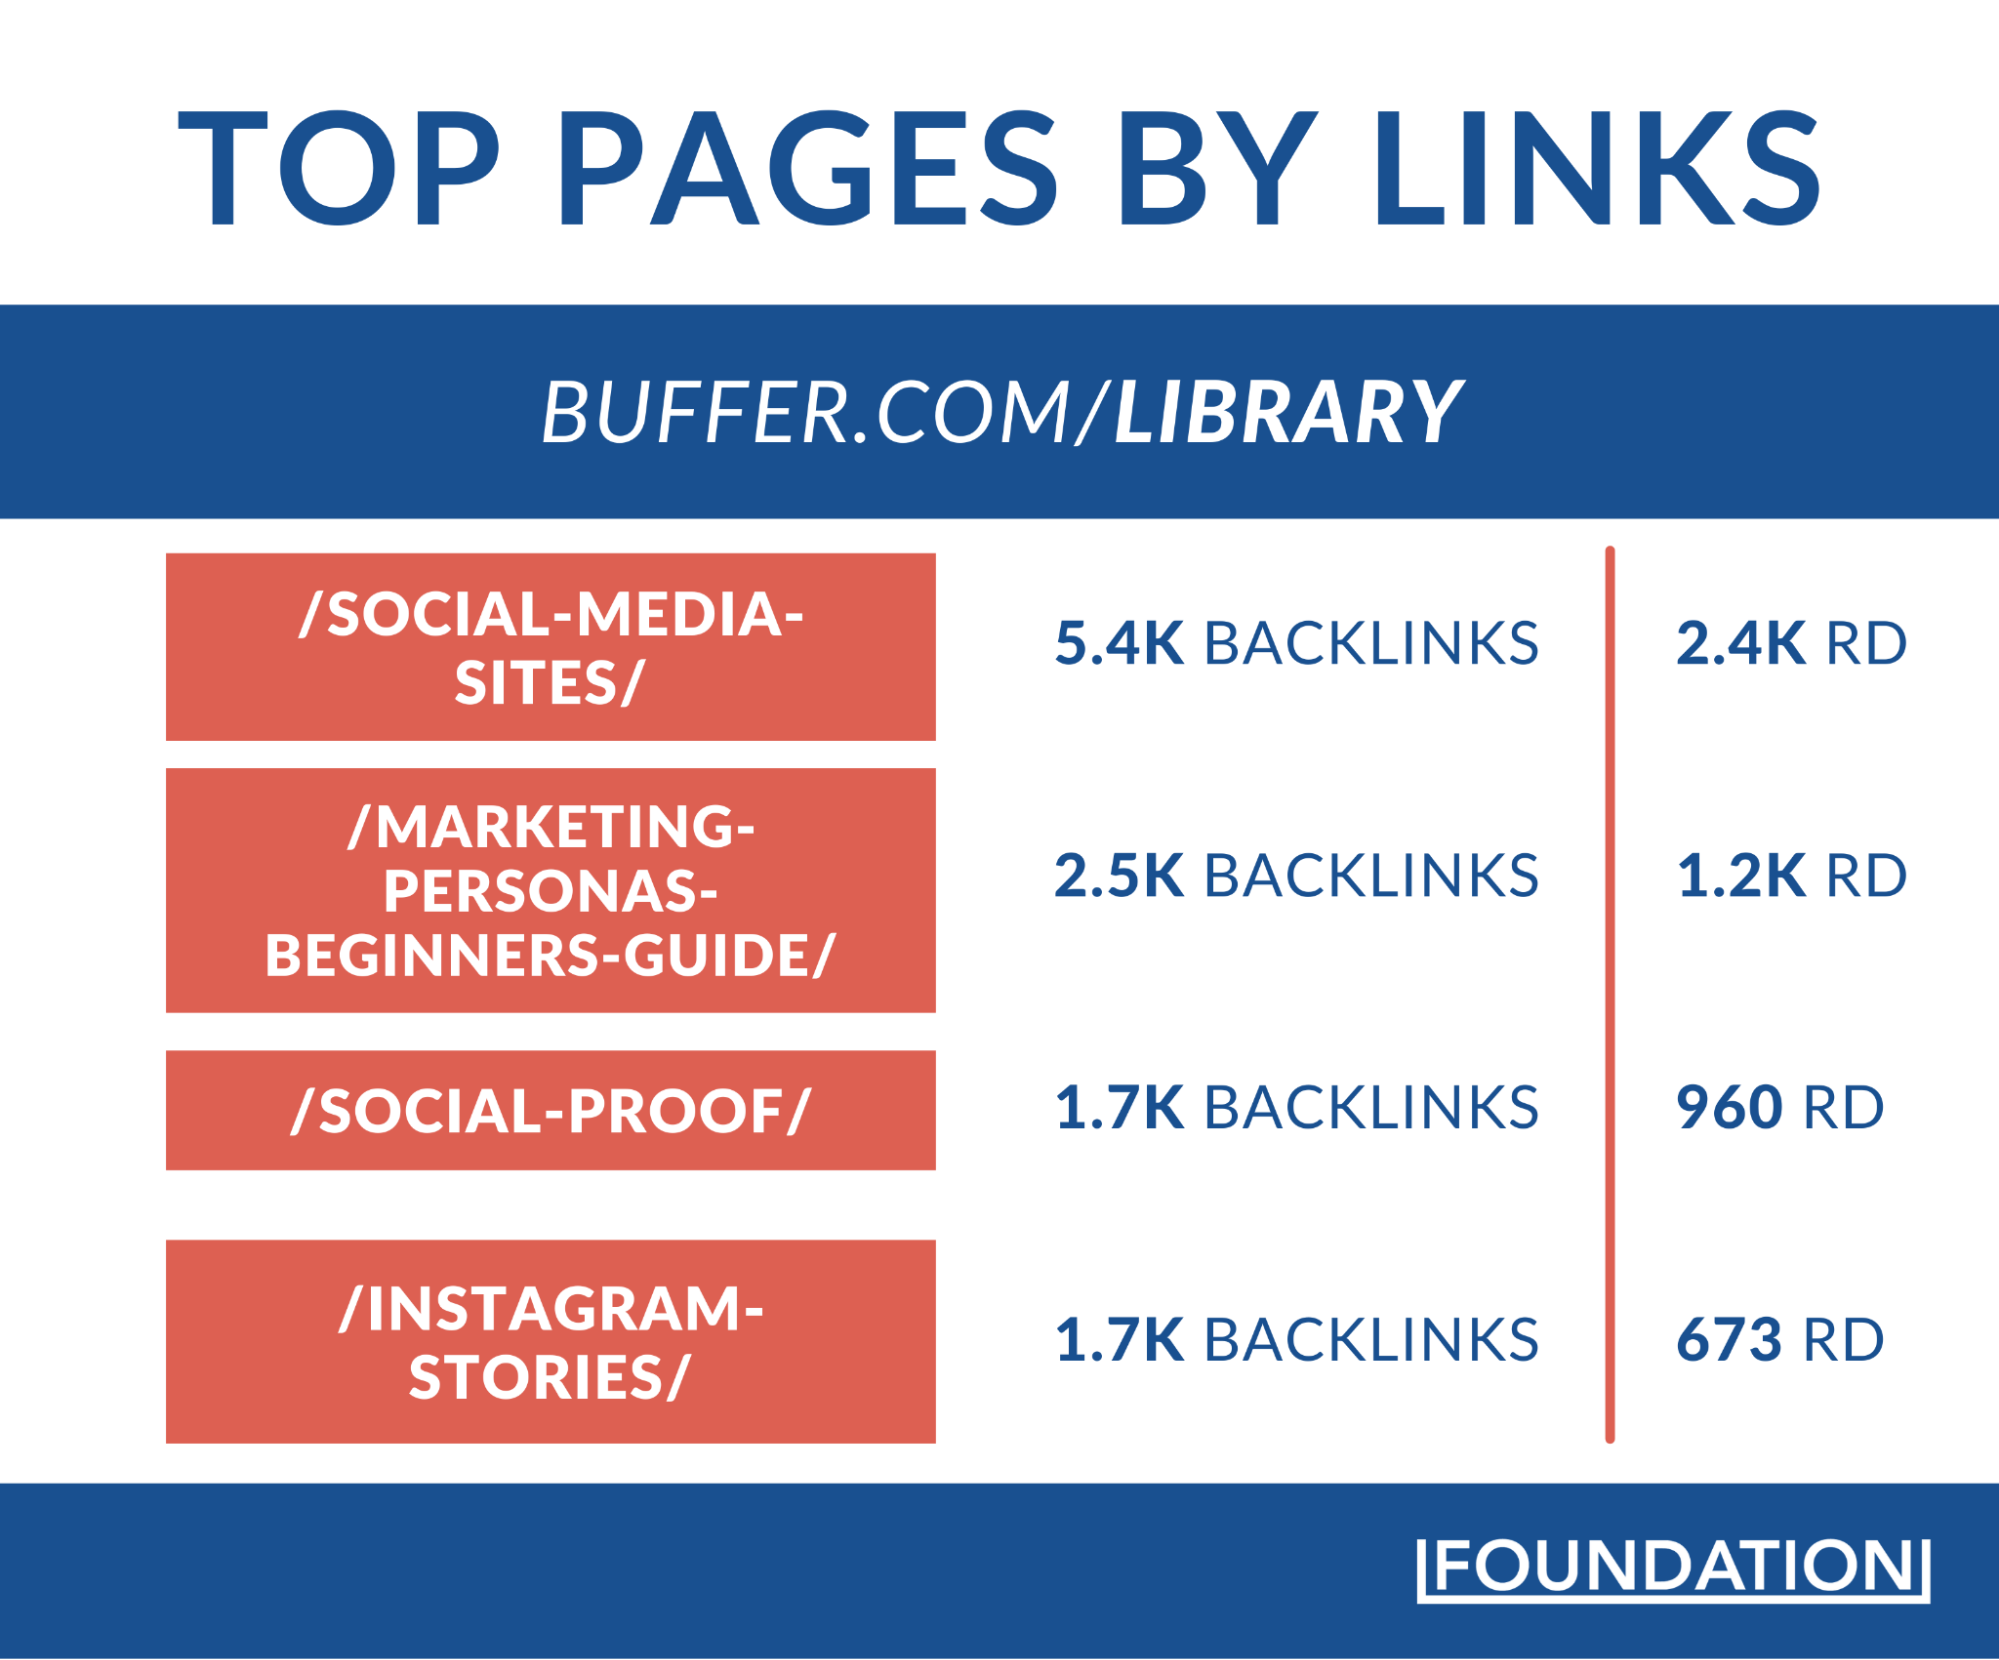 Buffer/library top five pages by link